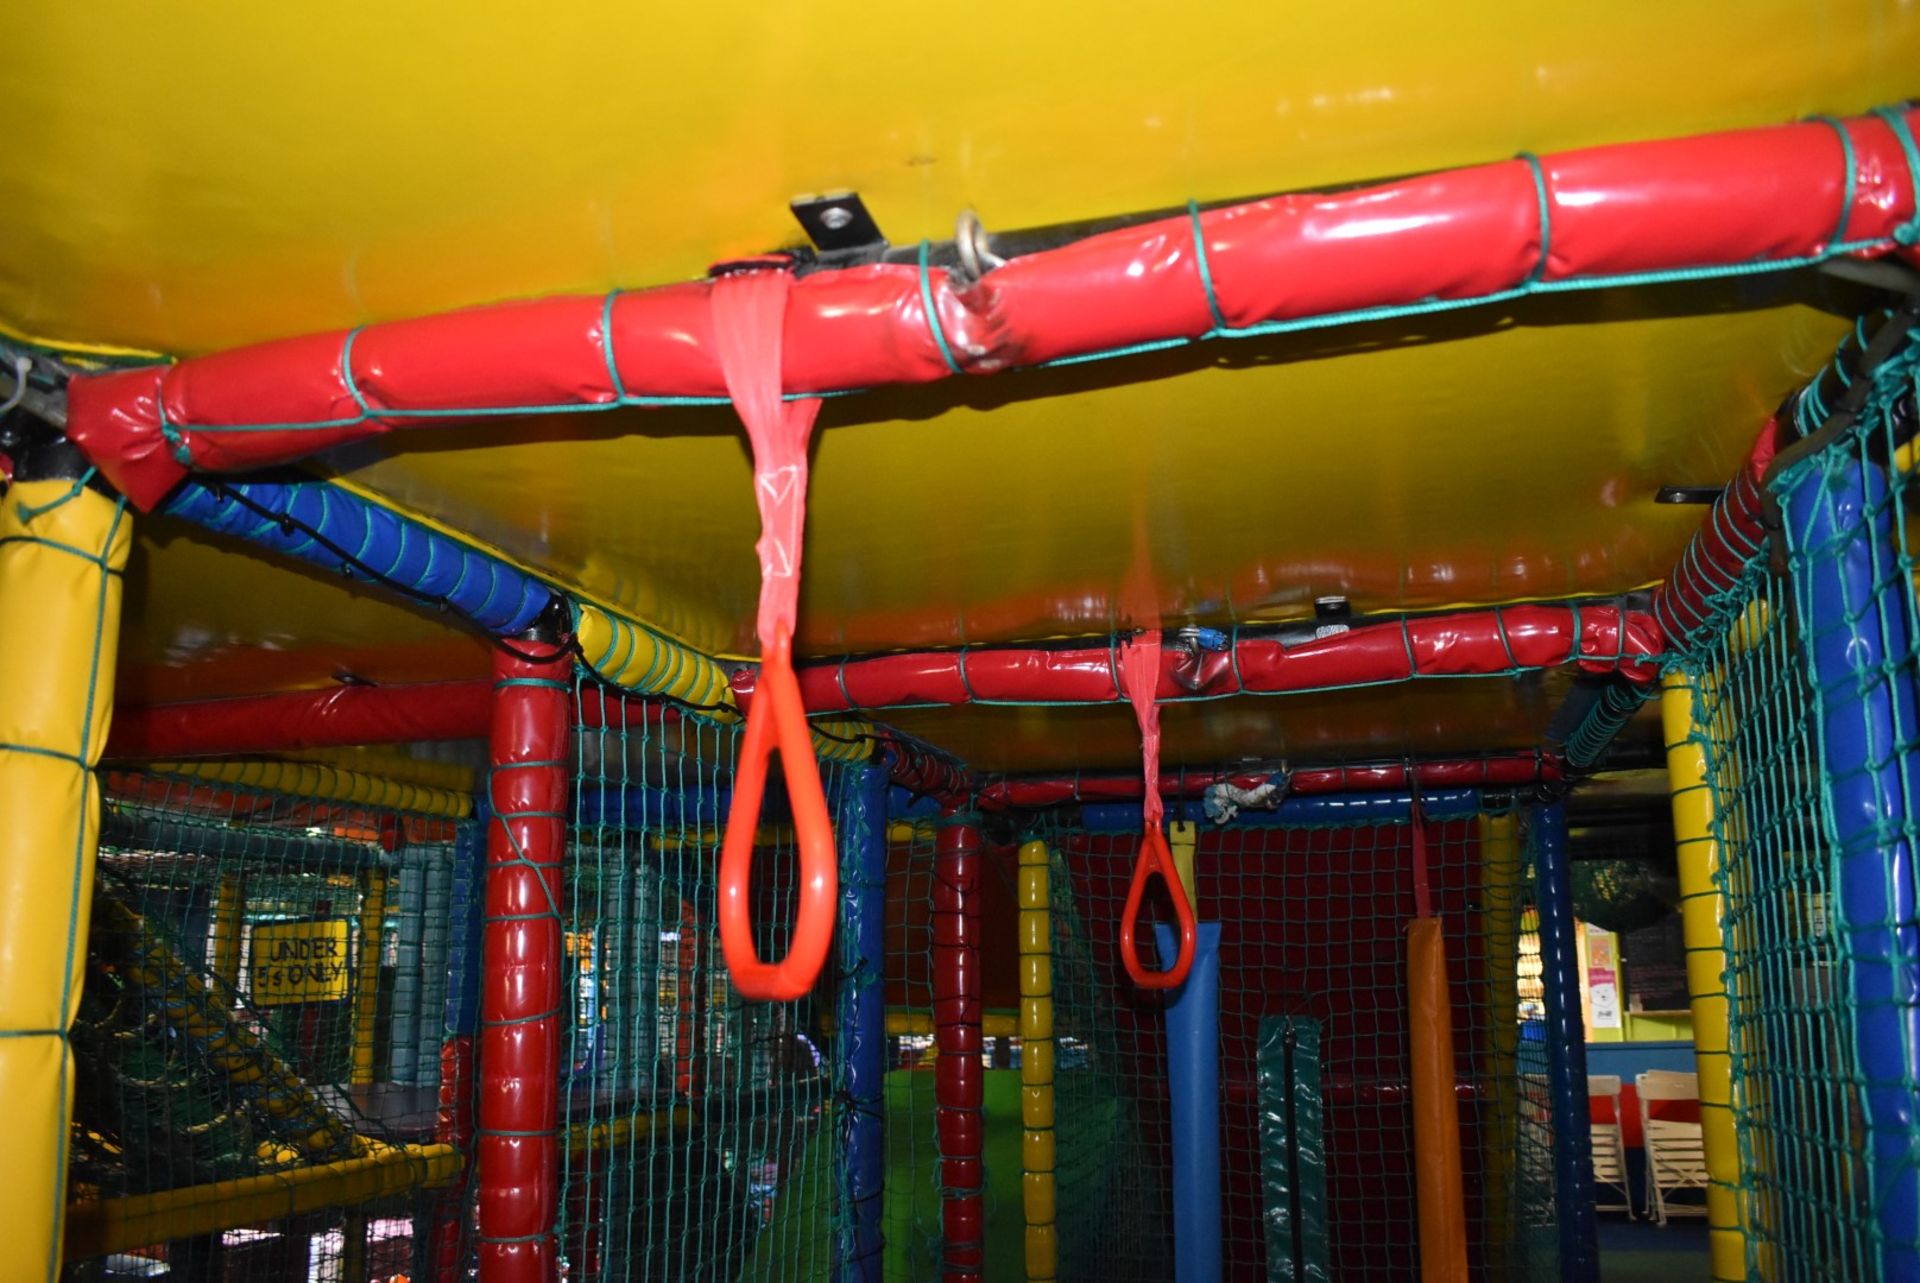 Bramleys Big Adventure Playground - Giant Action-Packed Playcentre With Slides, Zip Line Swings, - Image 19 of 128